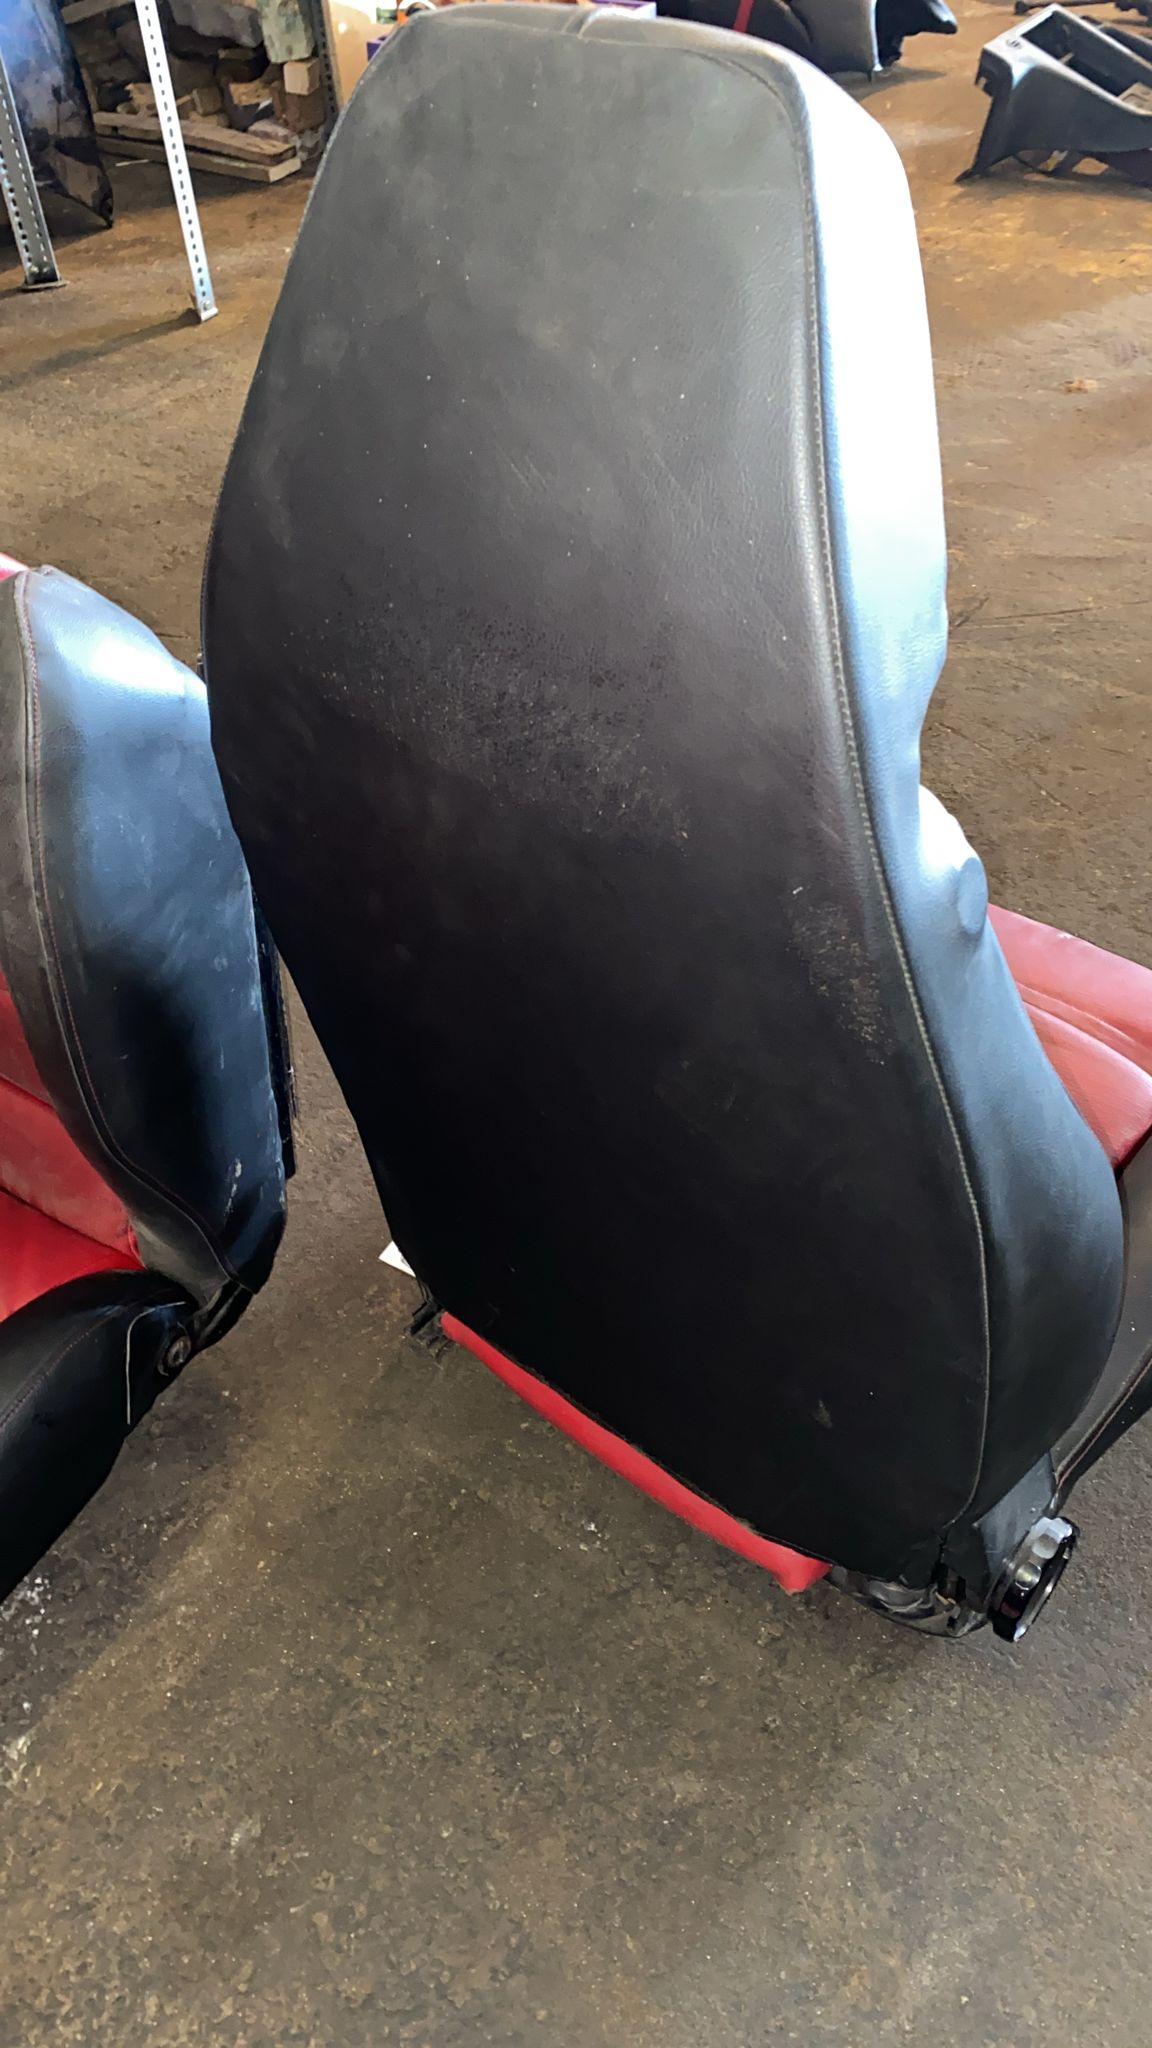 Porsche 928 Pair of early manual seats for refurbishment